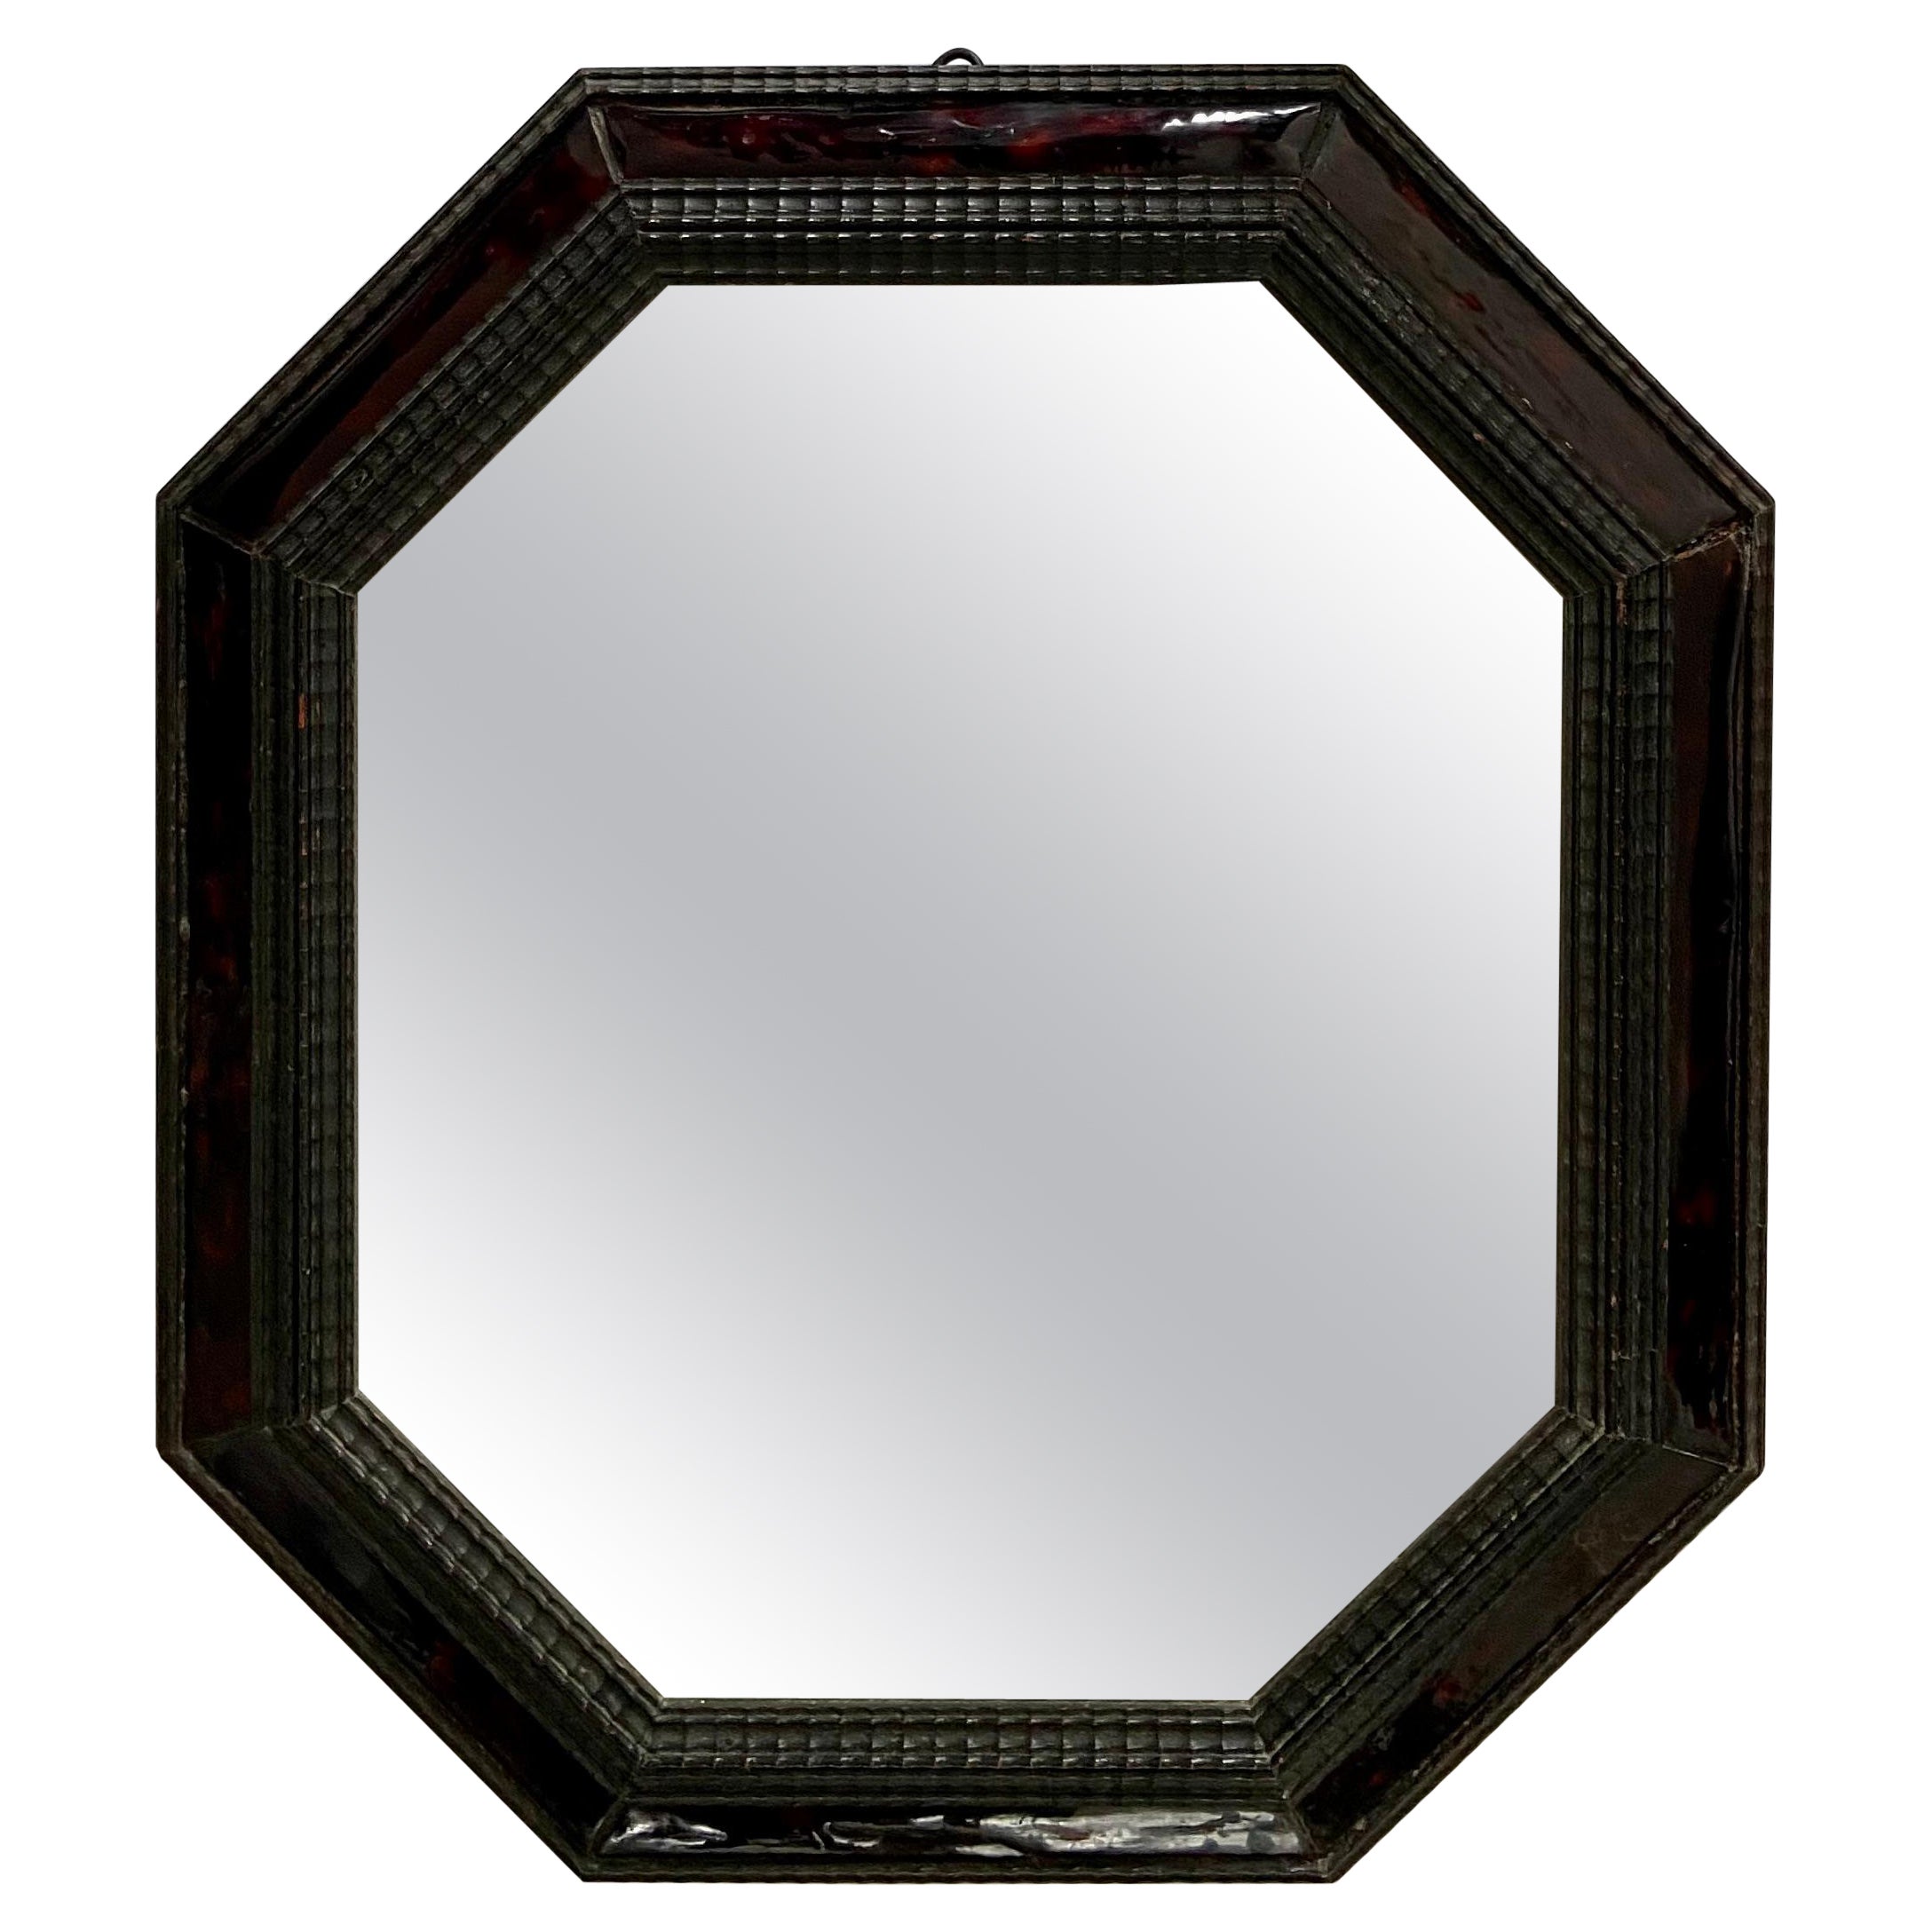 Octagonal mirror For Sale